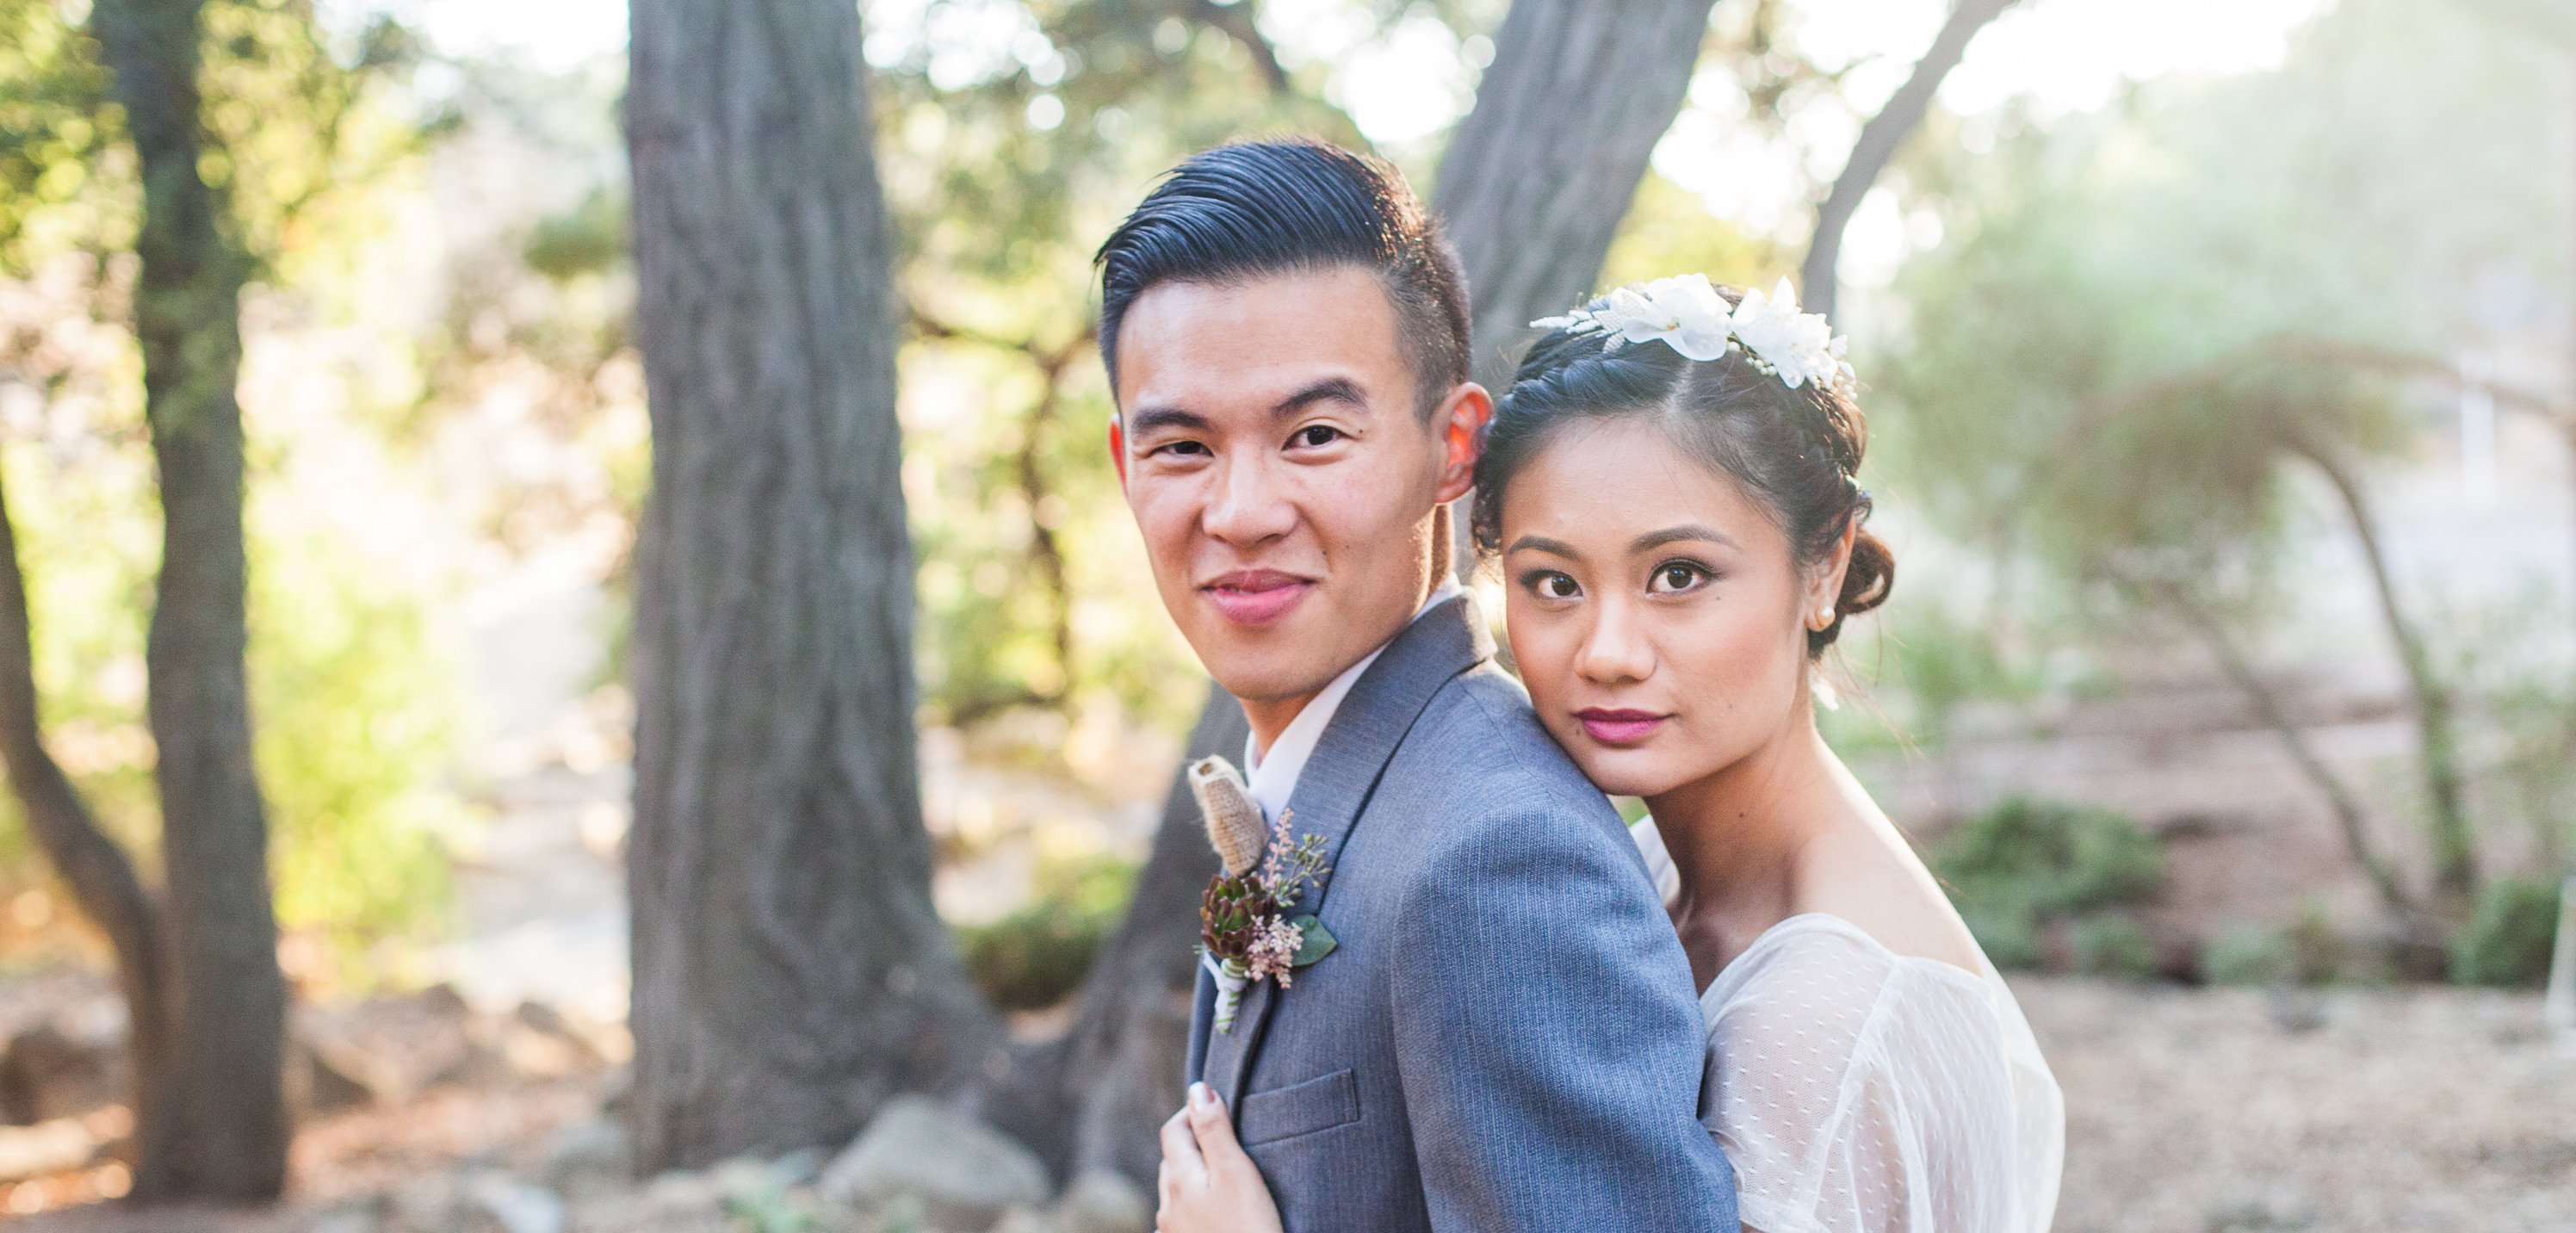 Styled Shoot | The Story of Alice & James